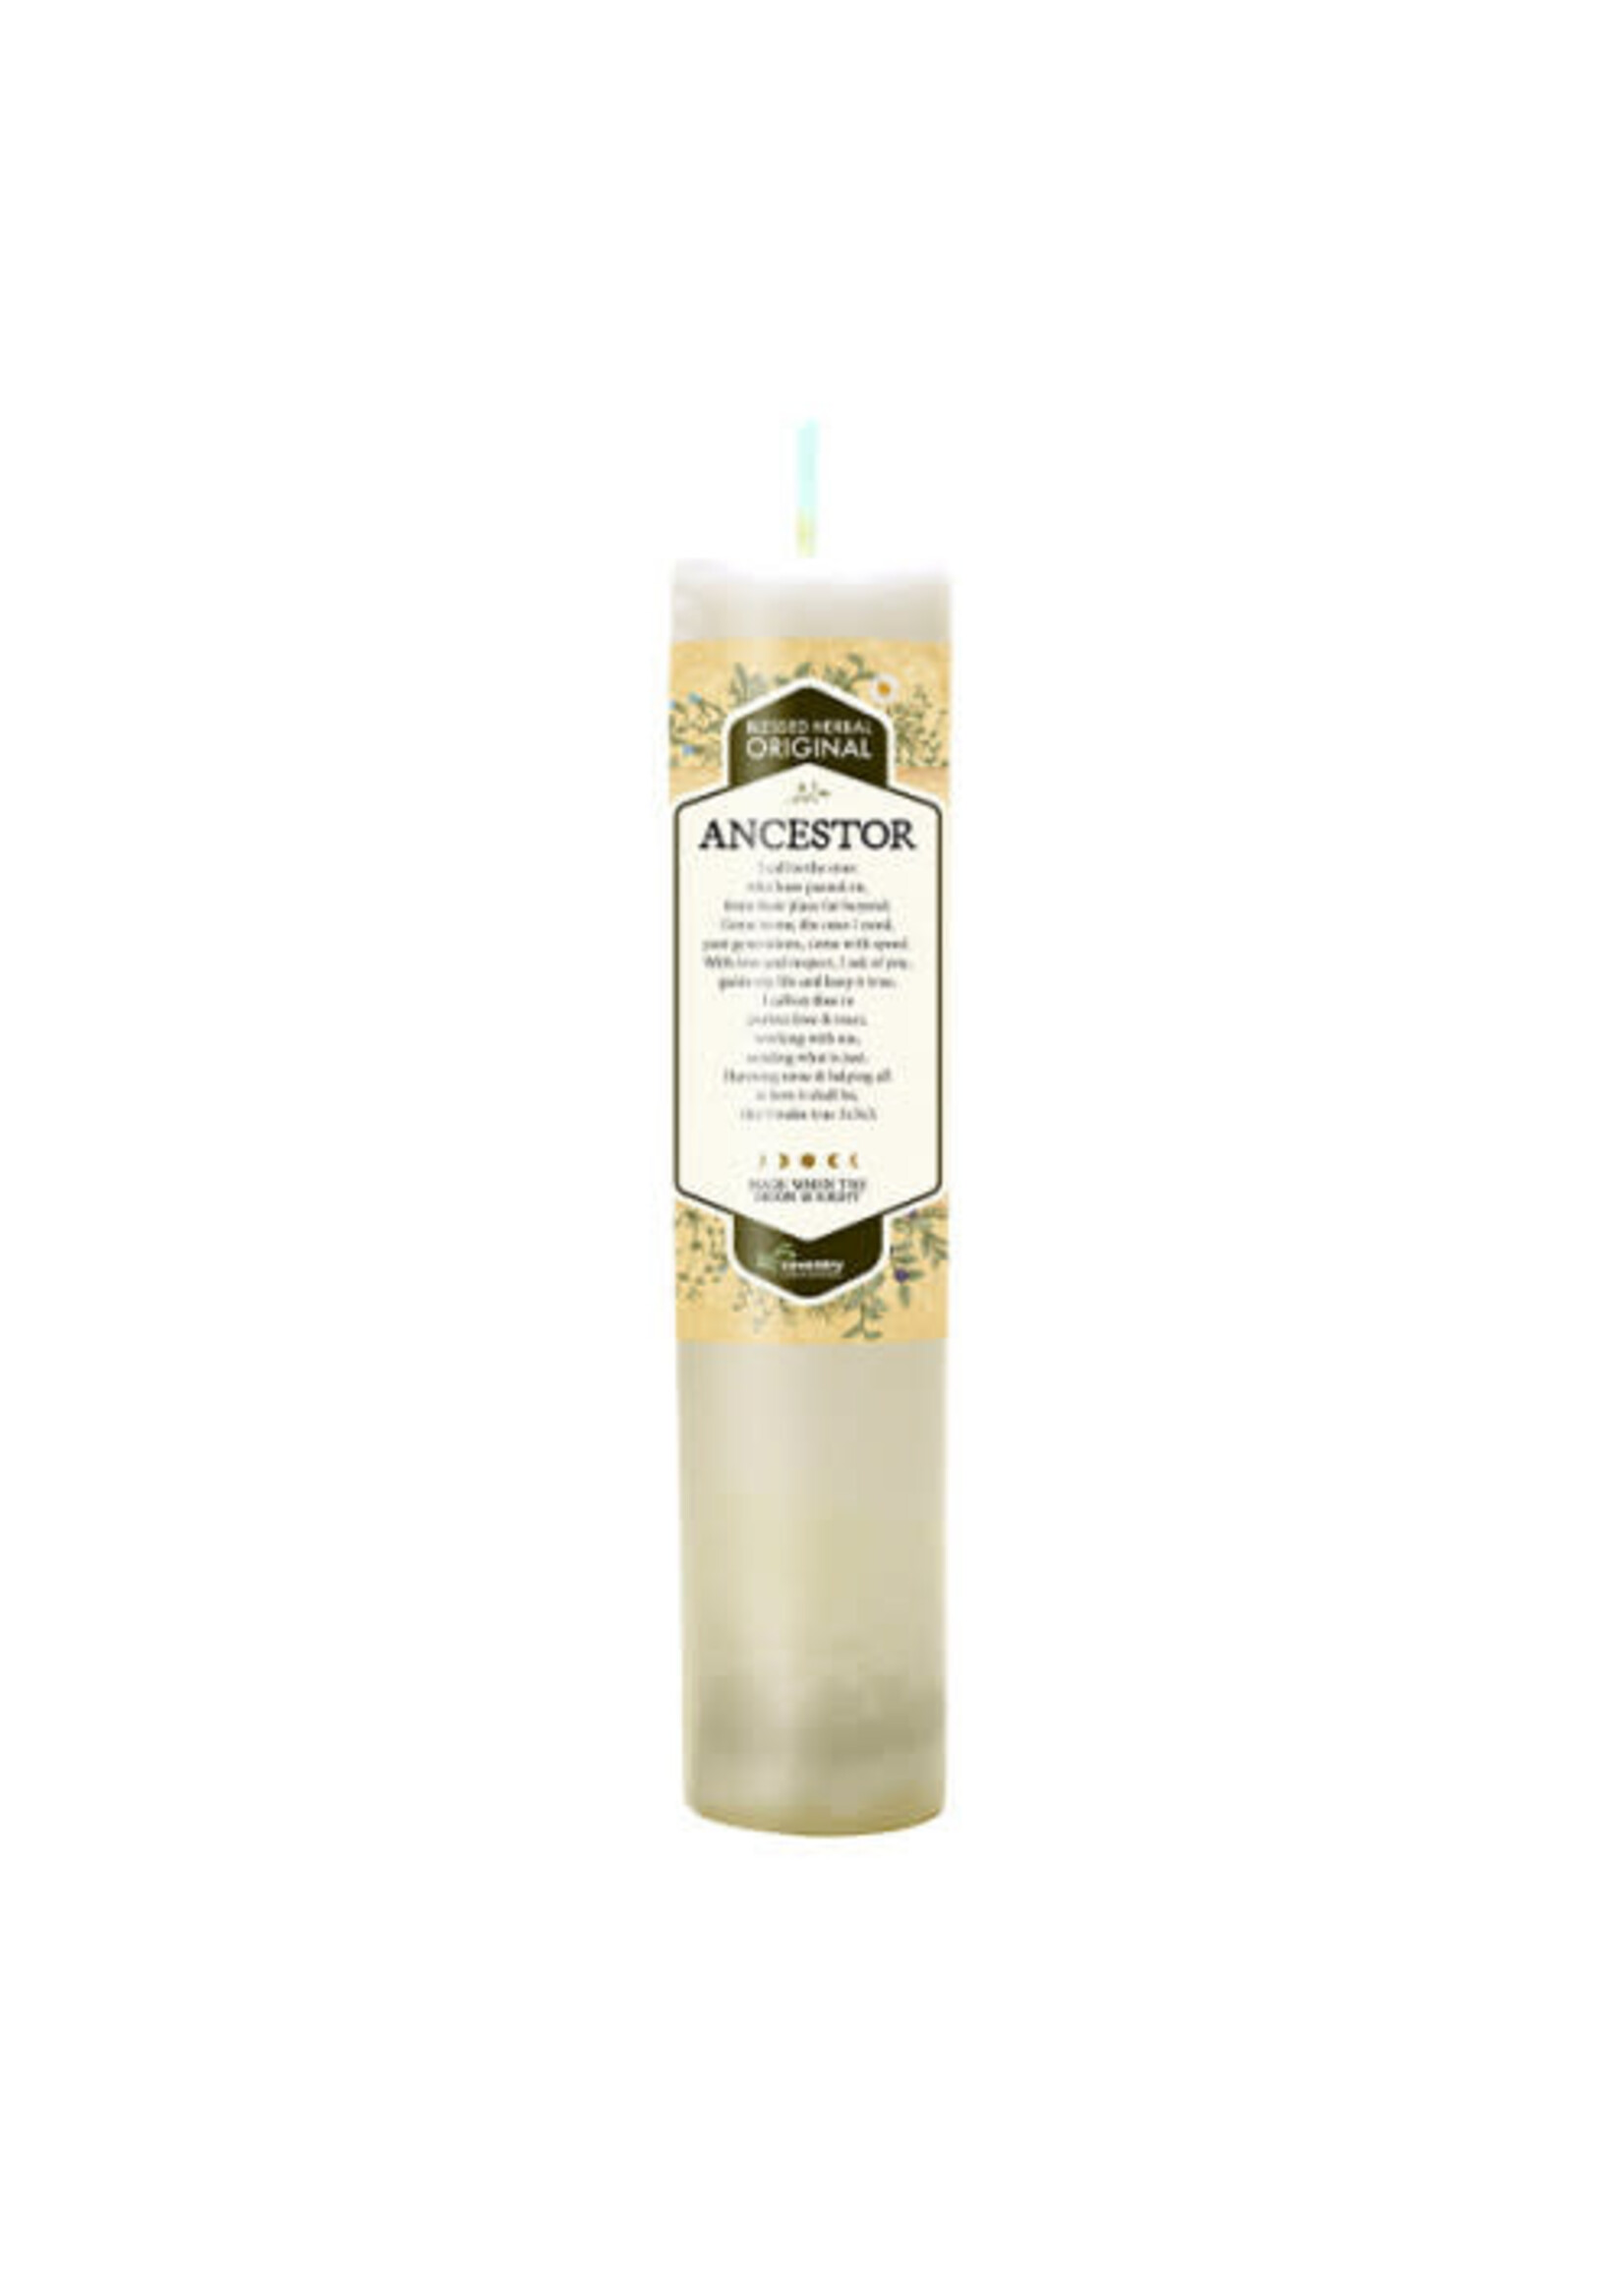 Coventry Creations BLESSED HERBAL Candle Ancestor